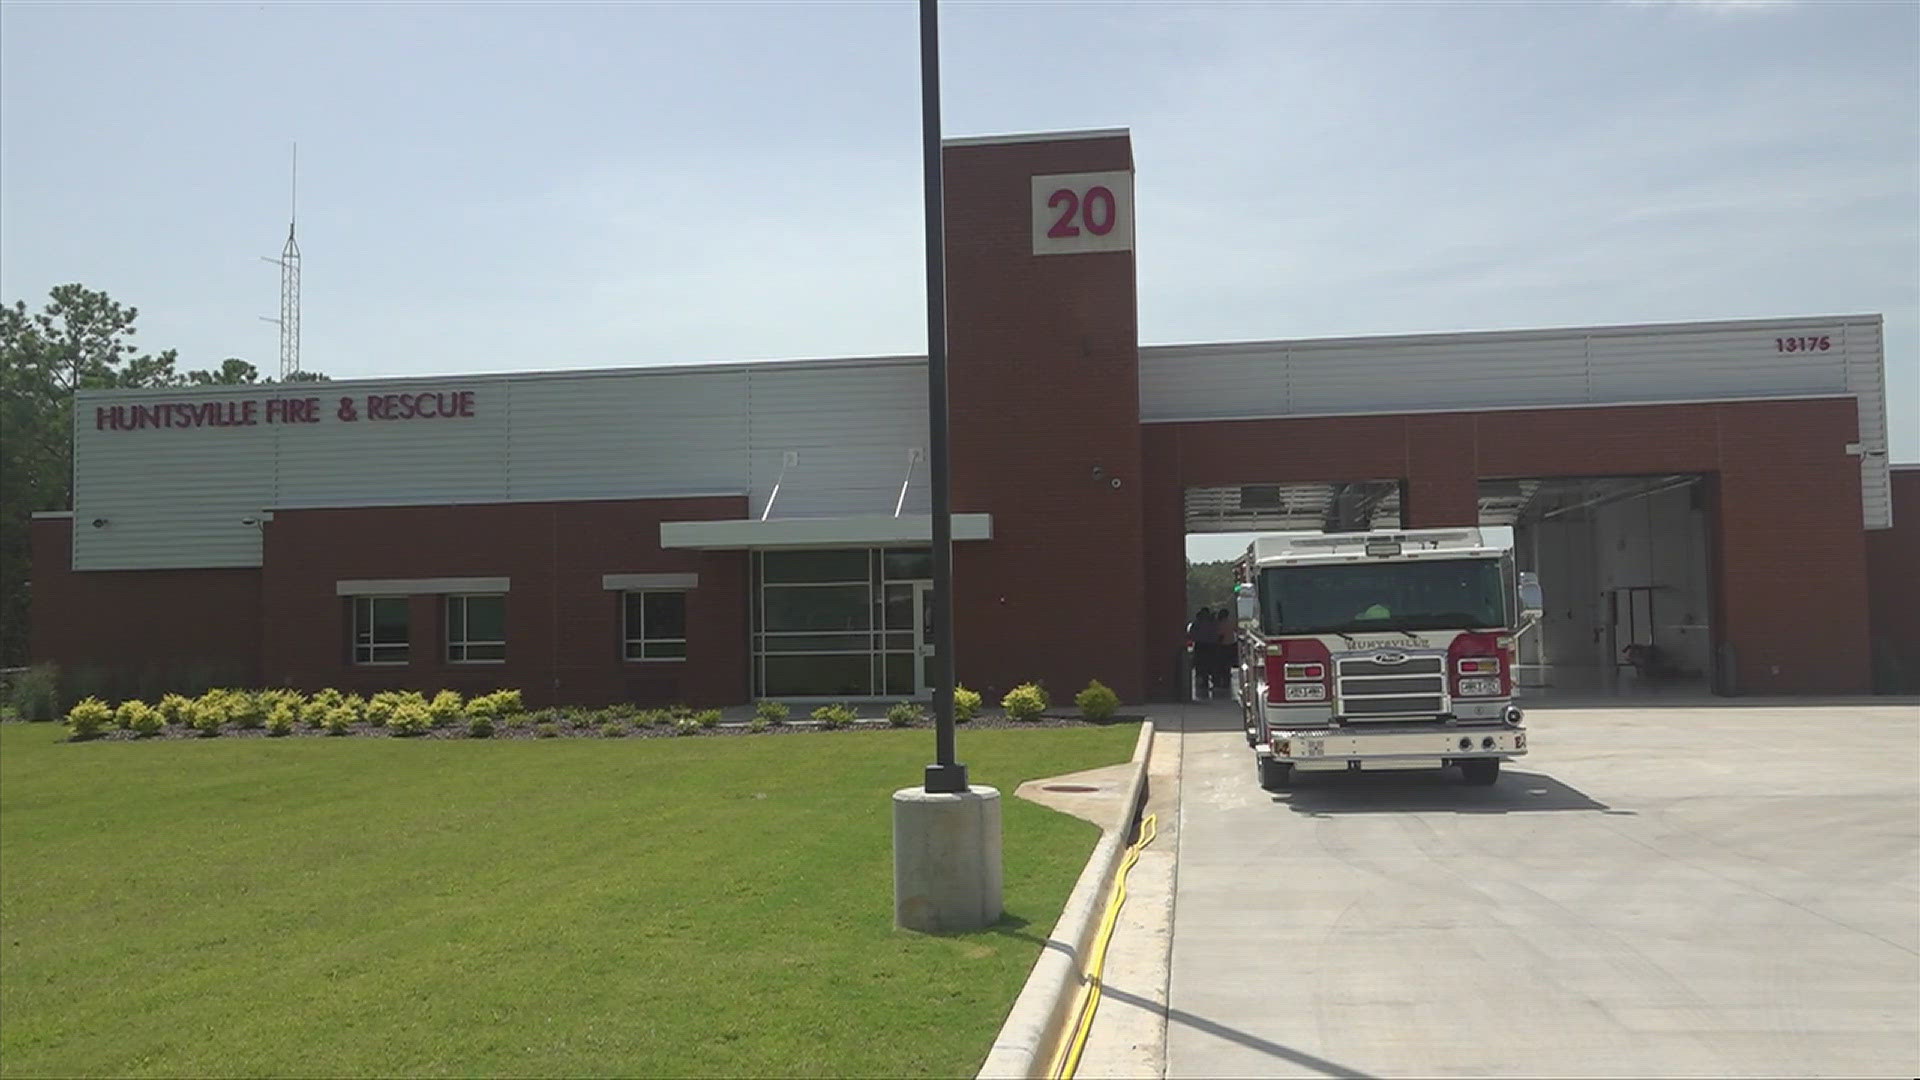 Huntsville Fire & Rescue strengthens its ability to protect neighborhoods with the opening of a new firehouse.